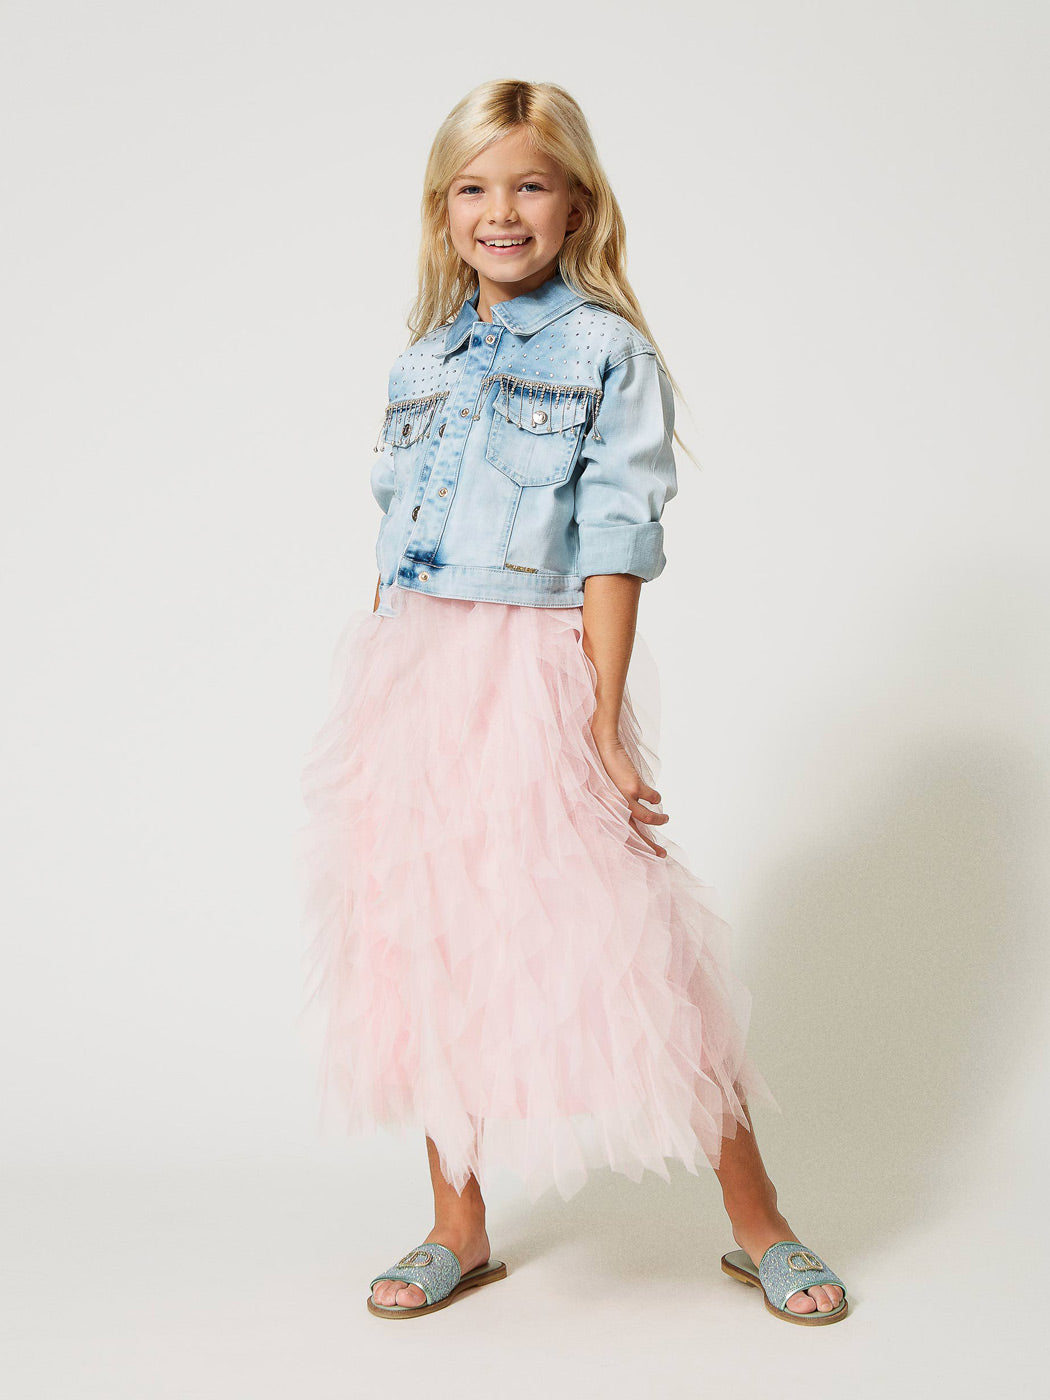 TWINSET Girl's Long skirt with tulle pink-231GJ2Q8B